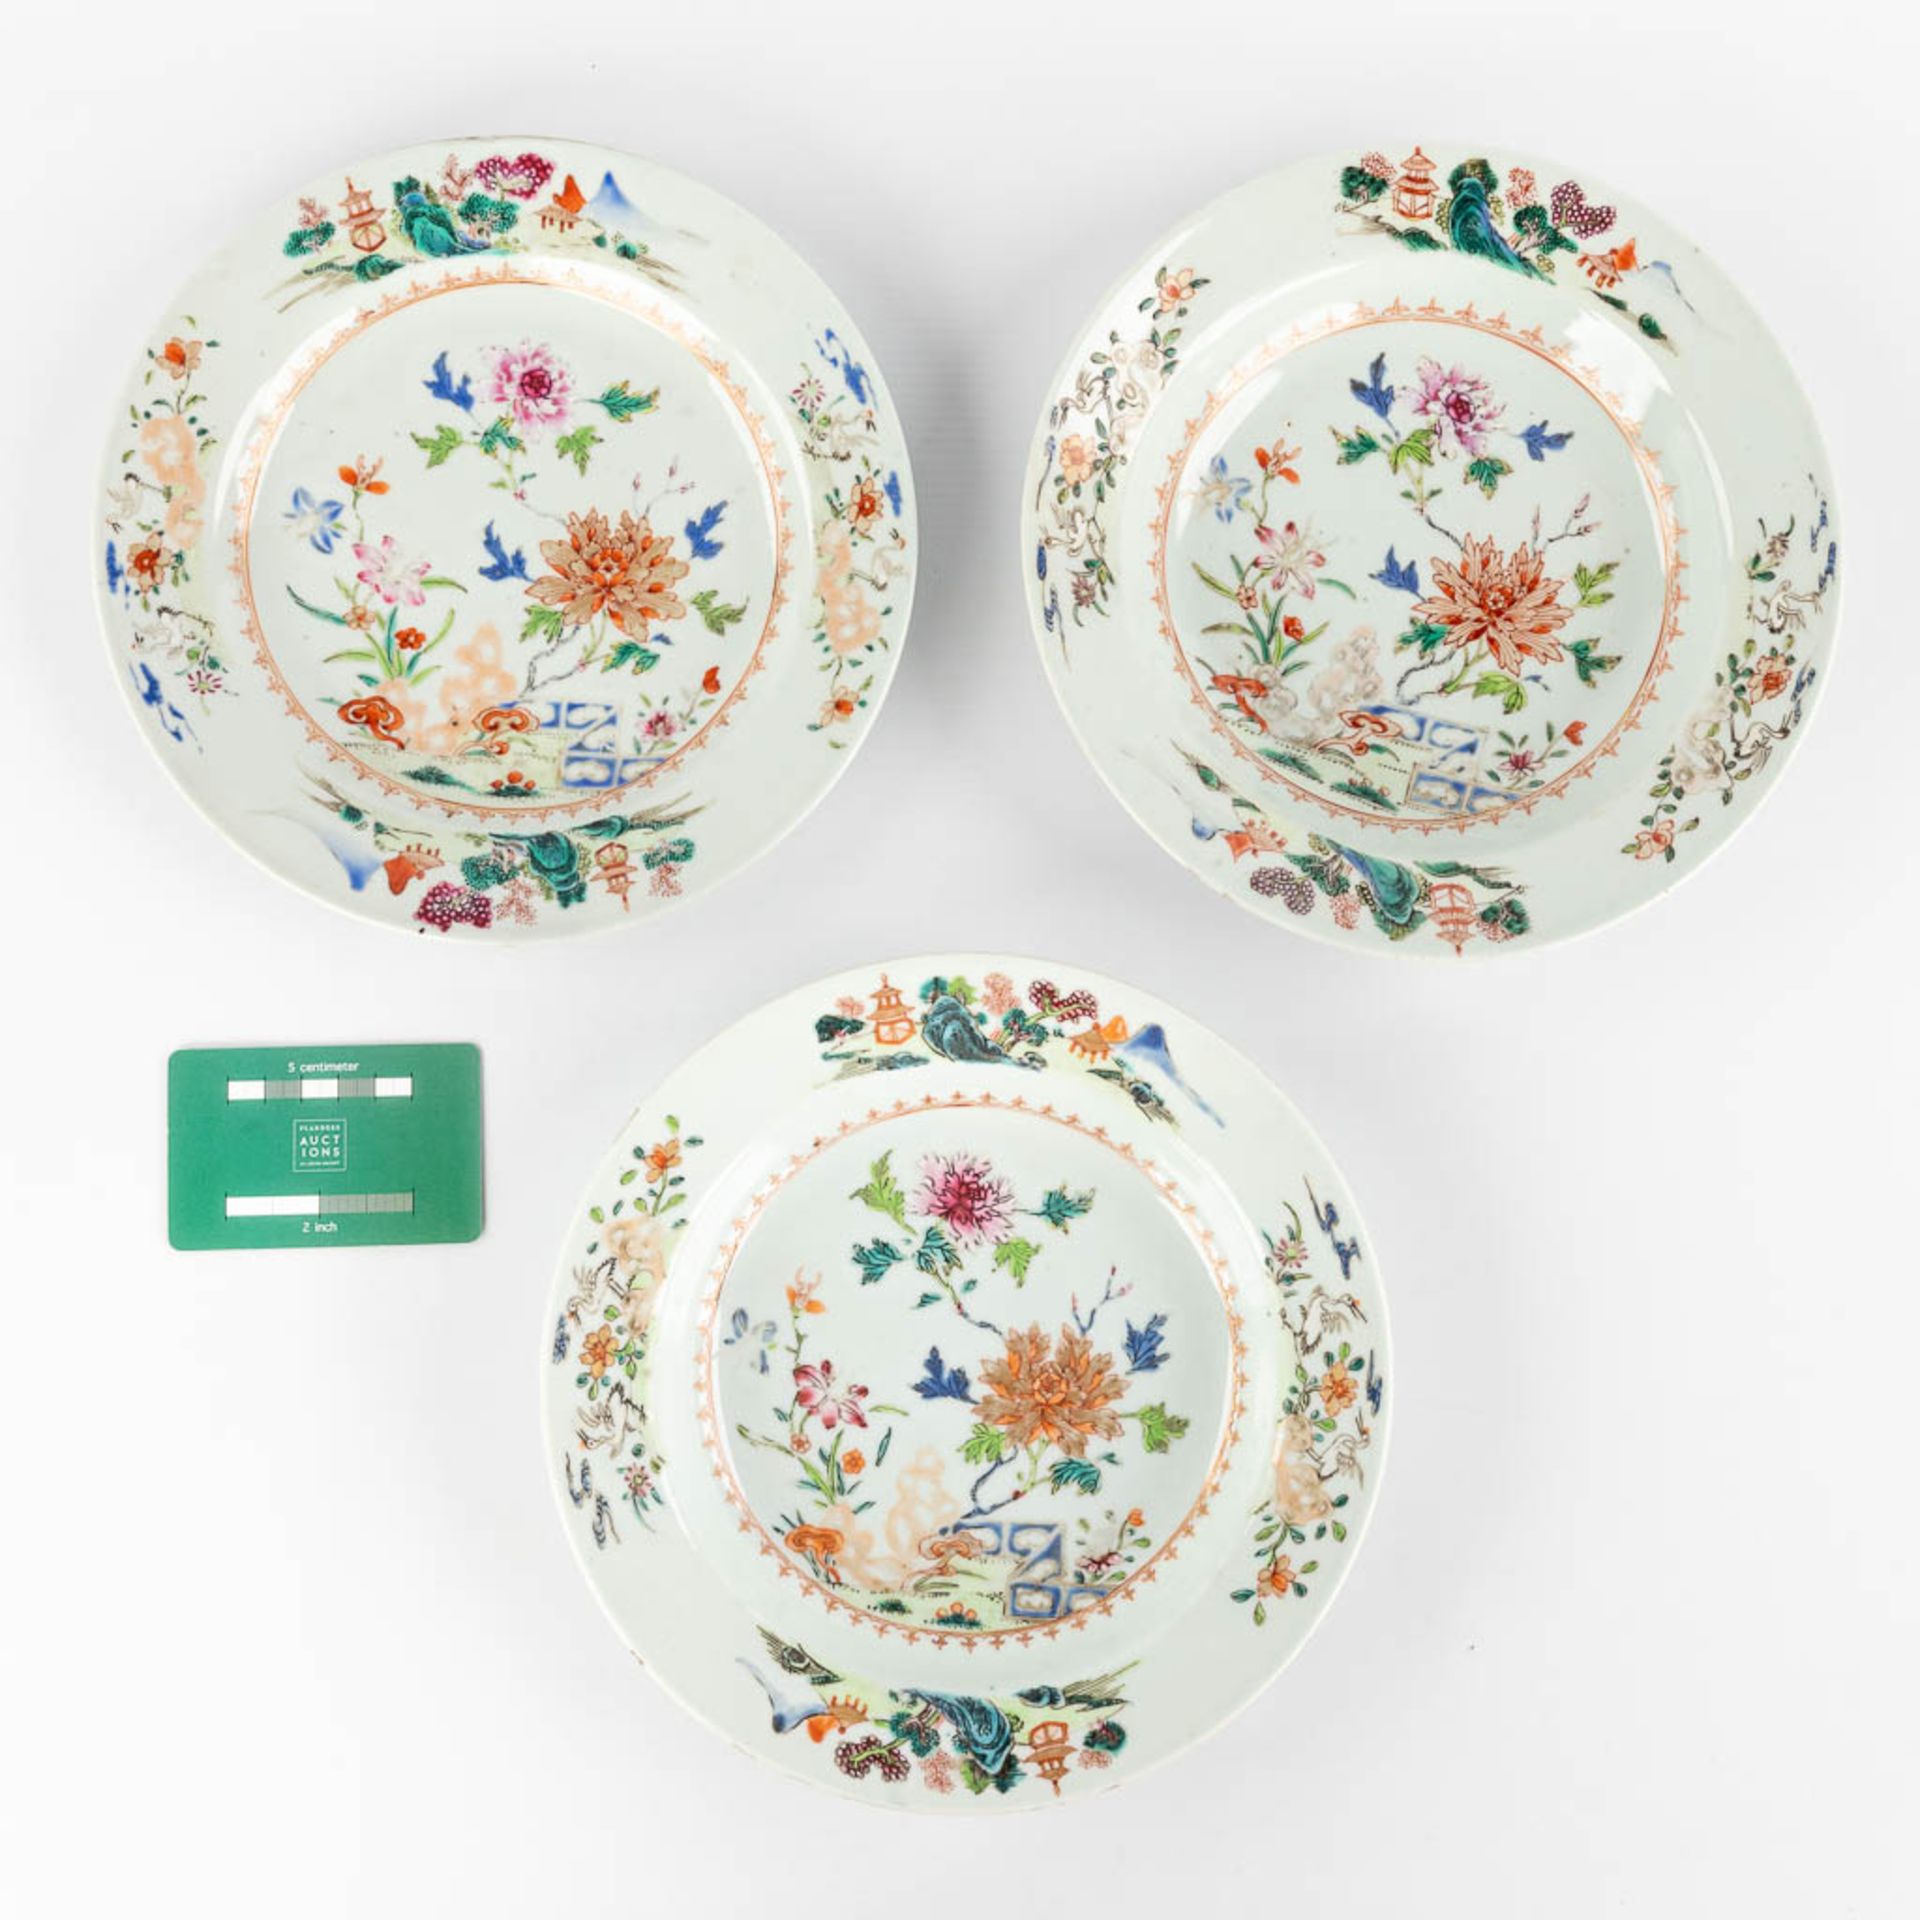 Three Chinese Famille Rose plates with a floral decor. 19th C. (D:22,5 cm) - Image 2 of 11